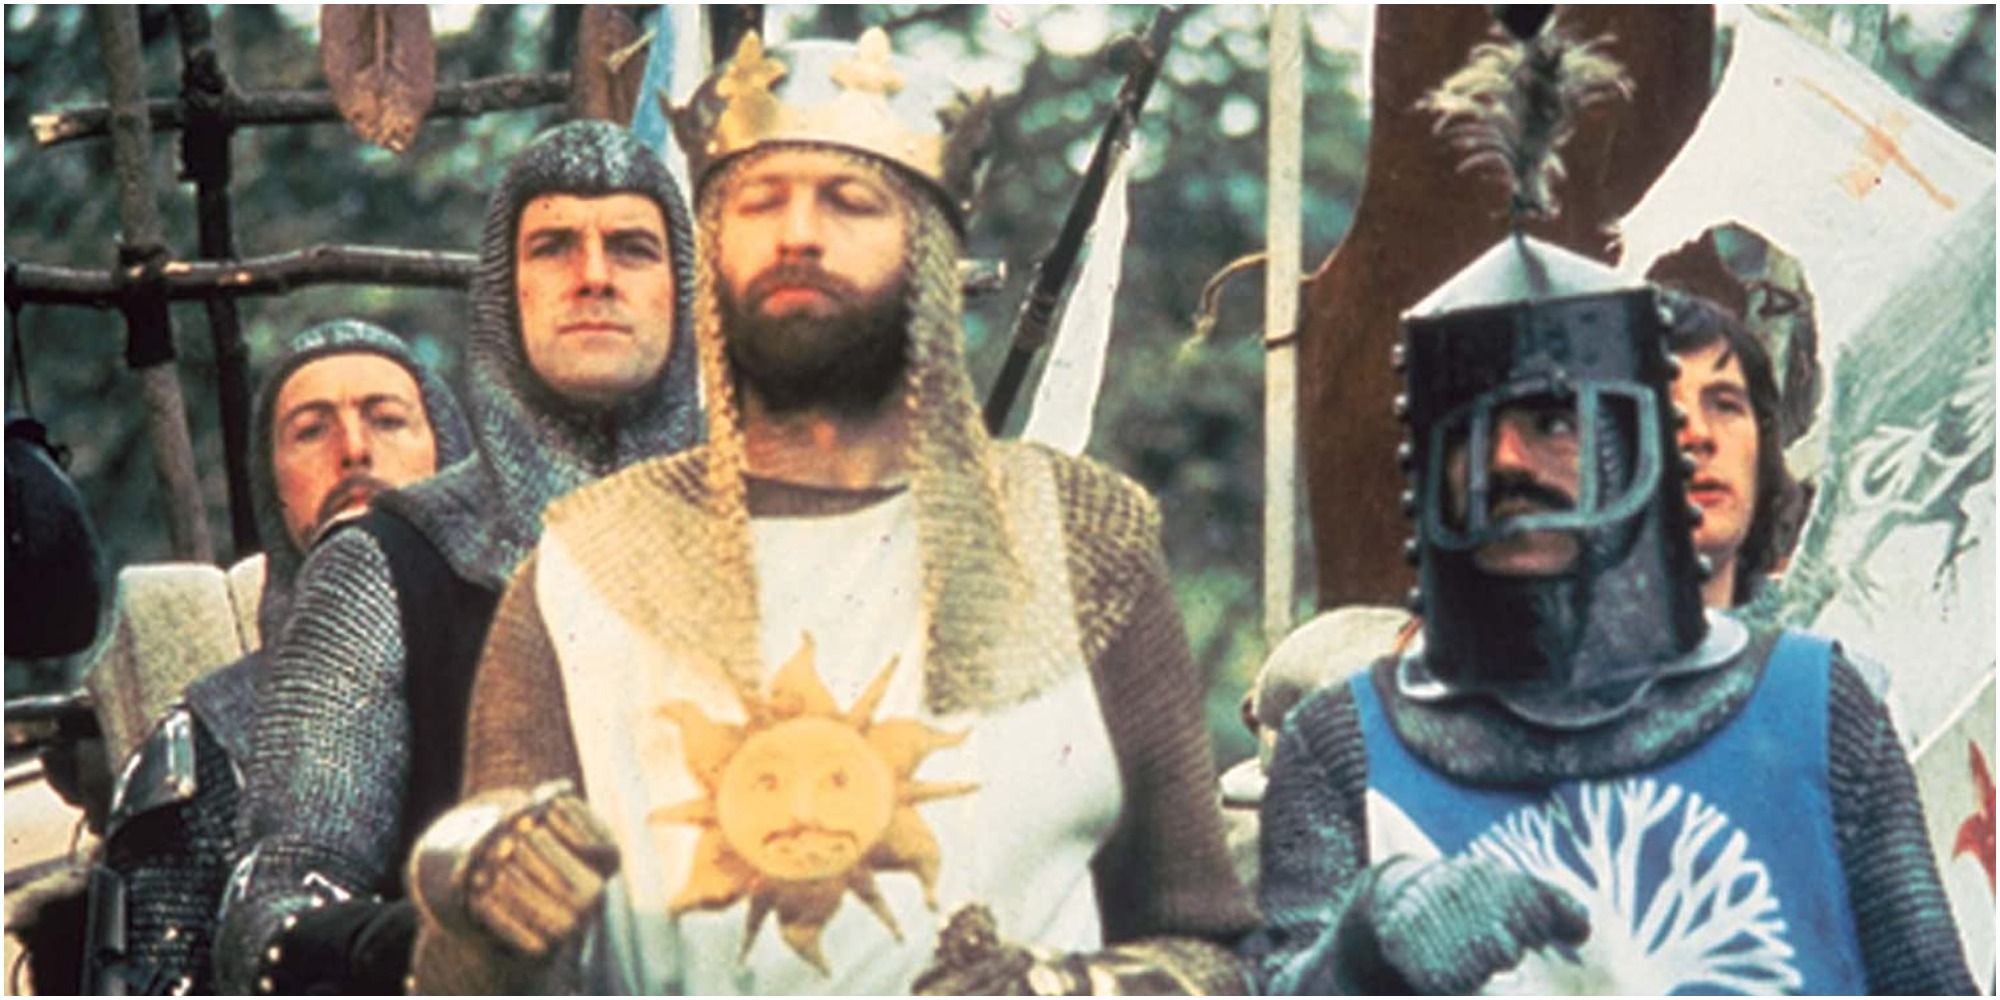 The king and his men in Monty Python and the Holy Grail